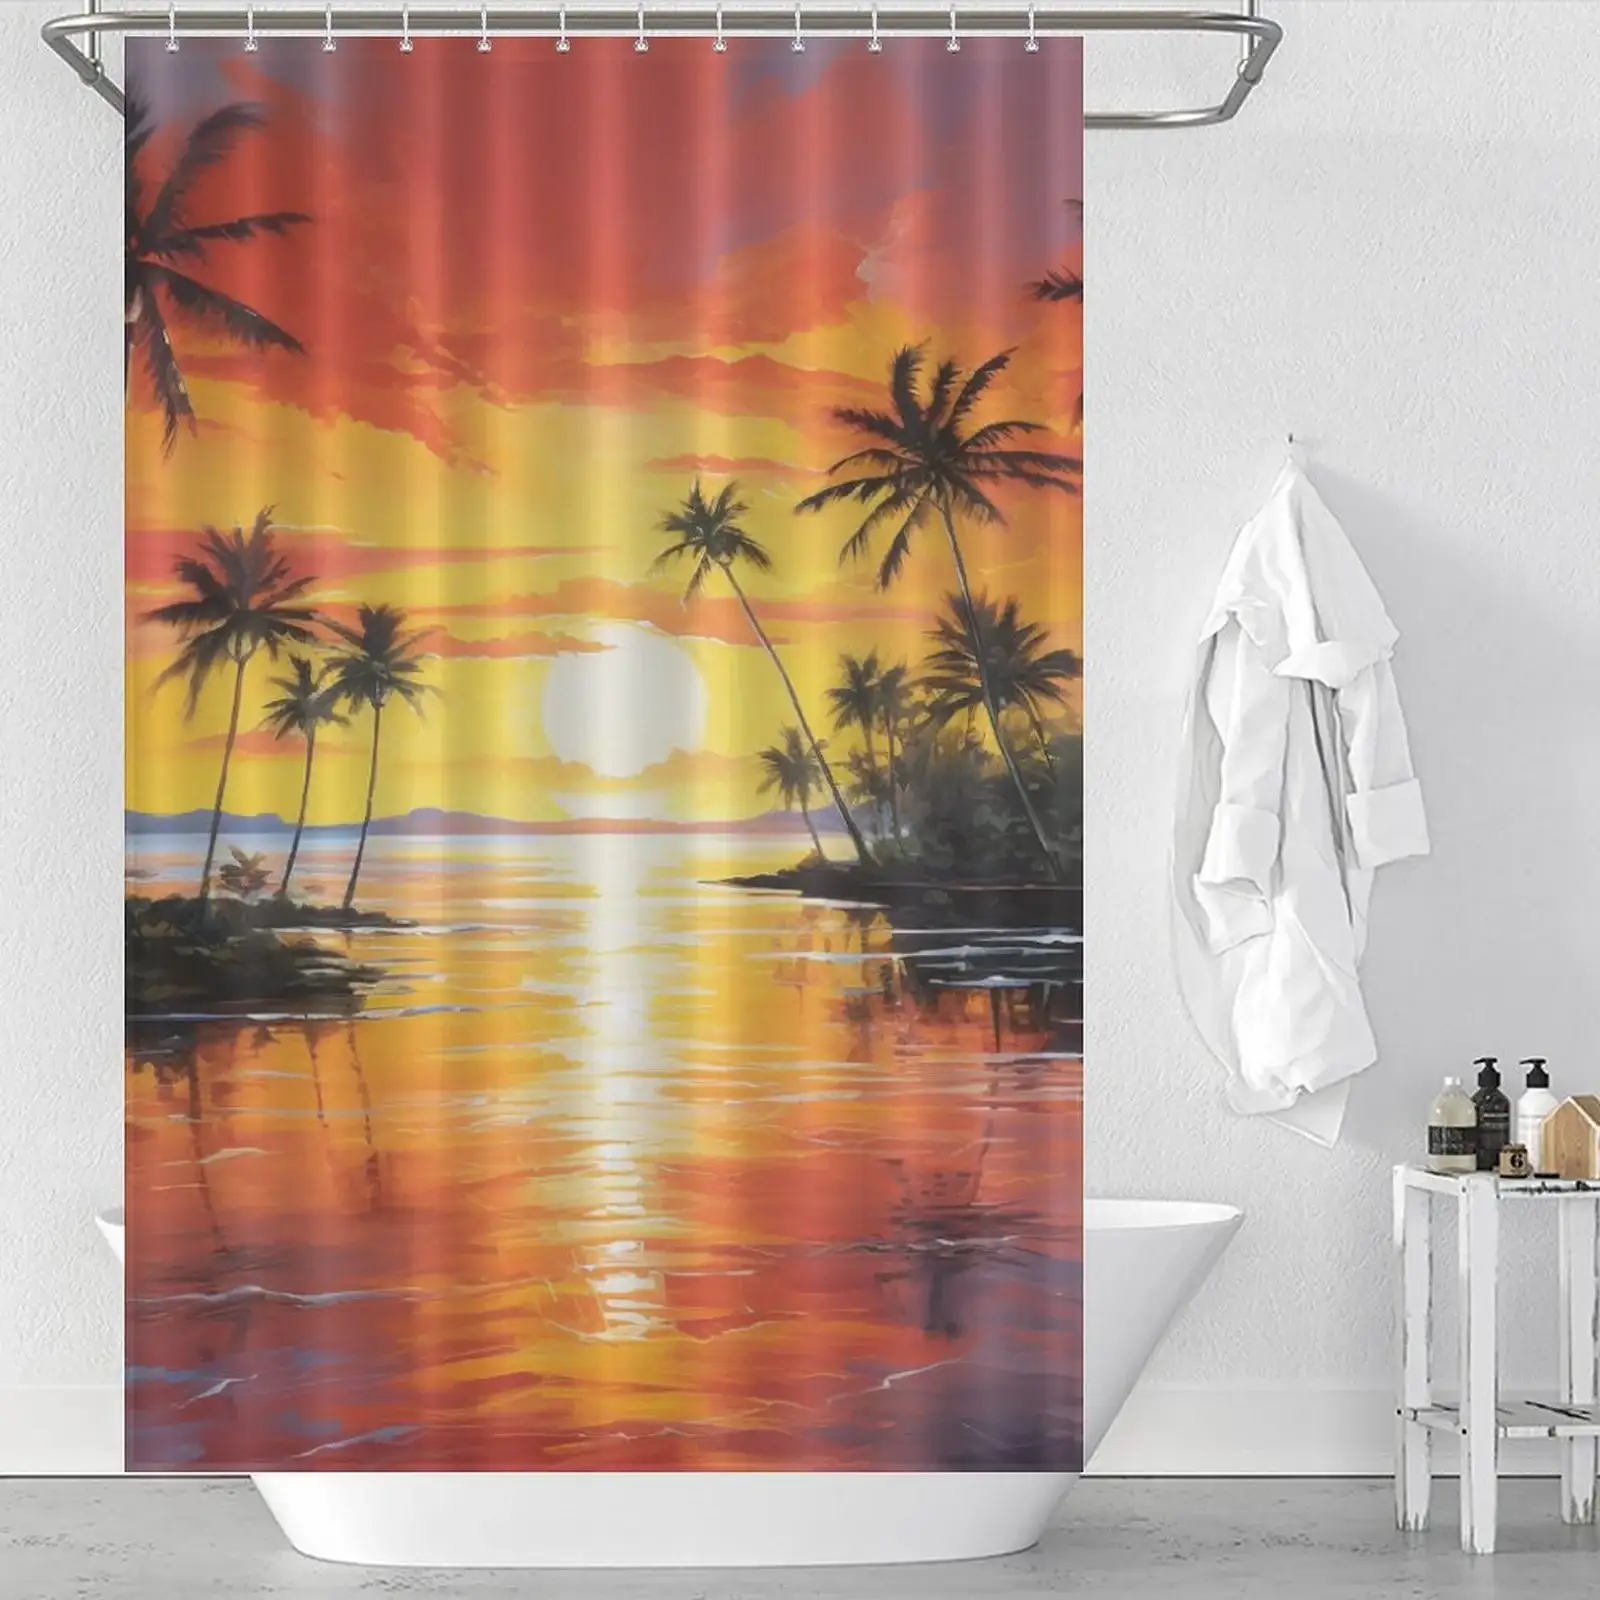 Unique Shower Curtains for Small Bathrooms: A tropical sunset shower curtain with palm trees.